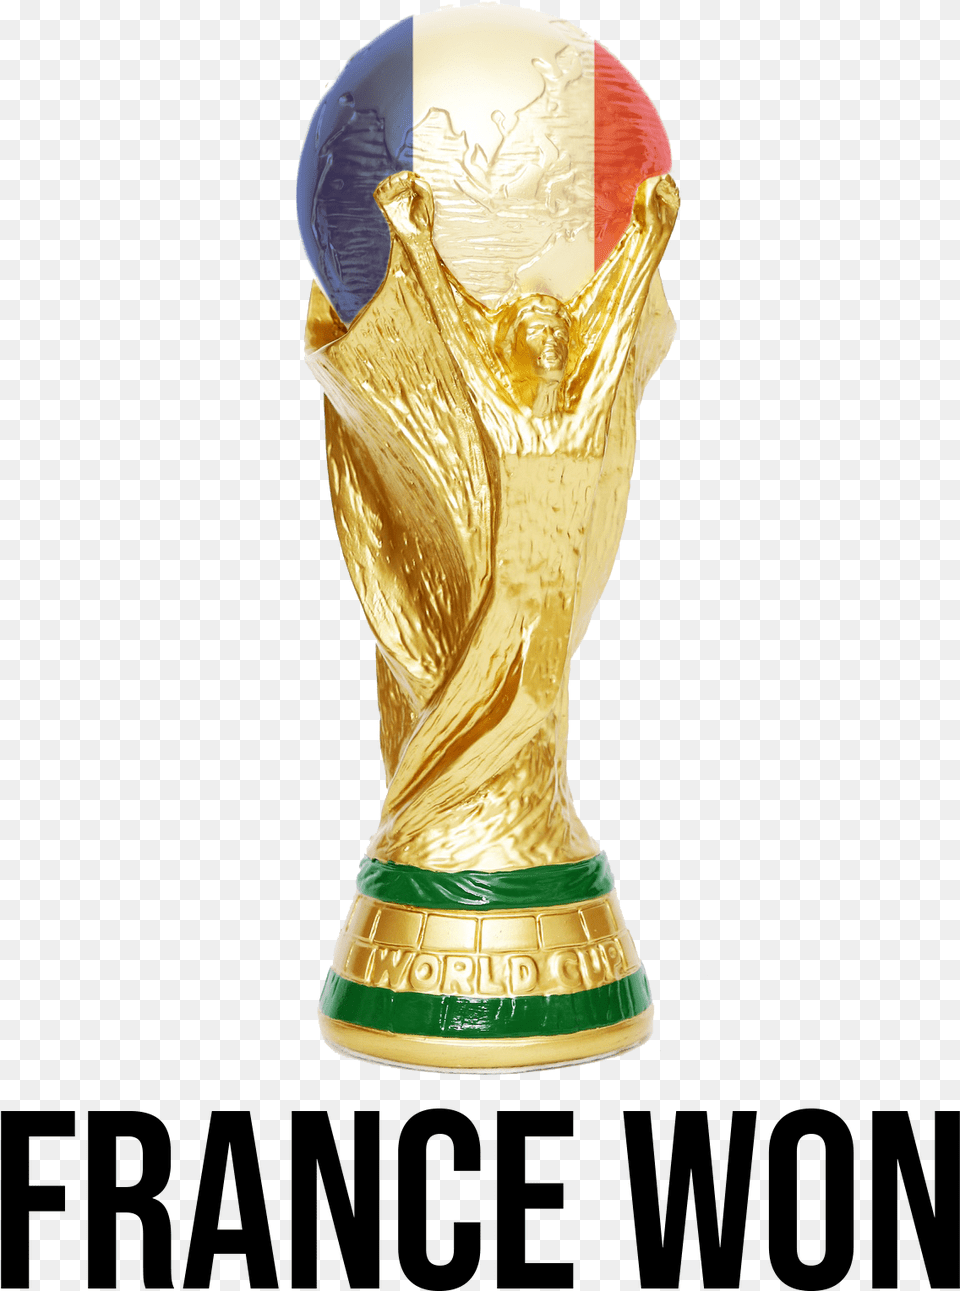 France Won Wm2018 France World Cup, Trophy, Adult, Female, Person Png Image